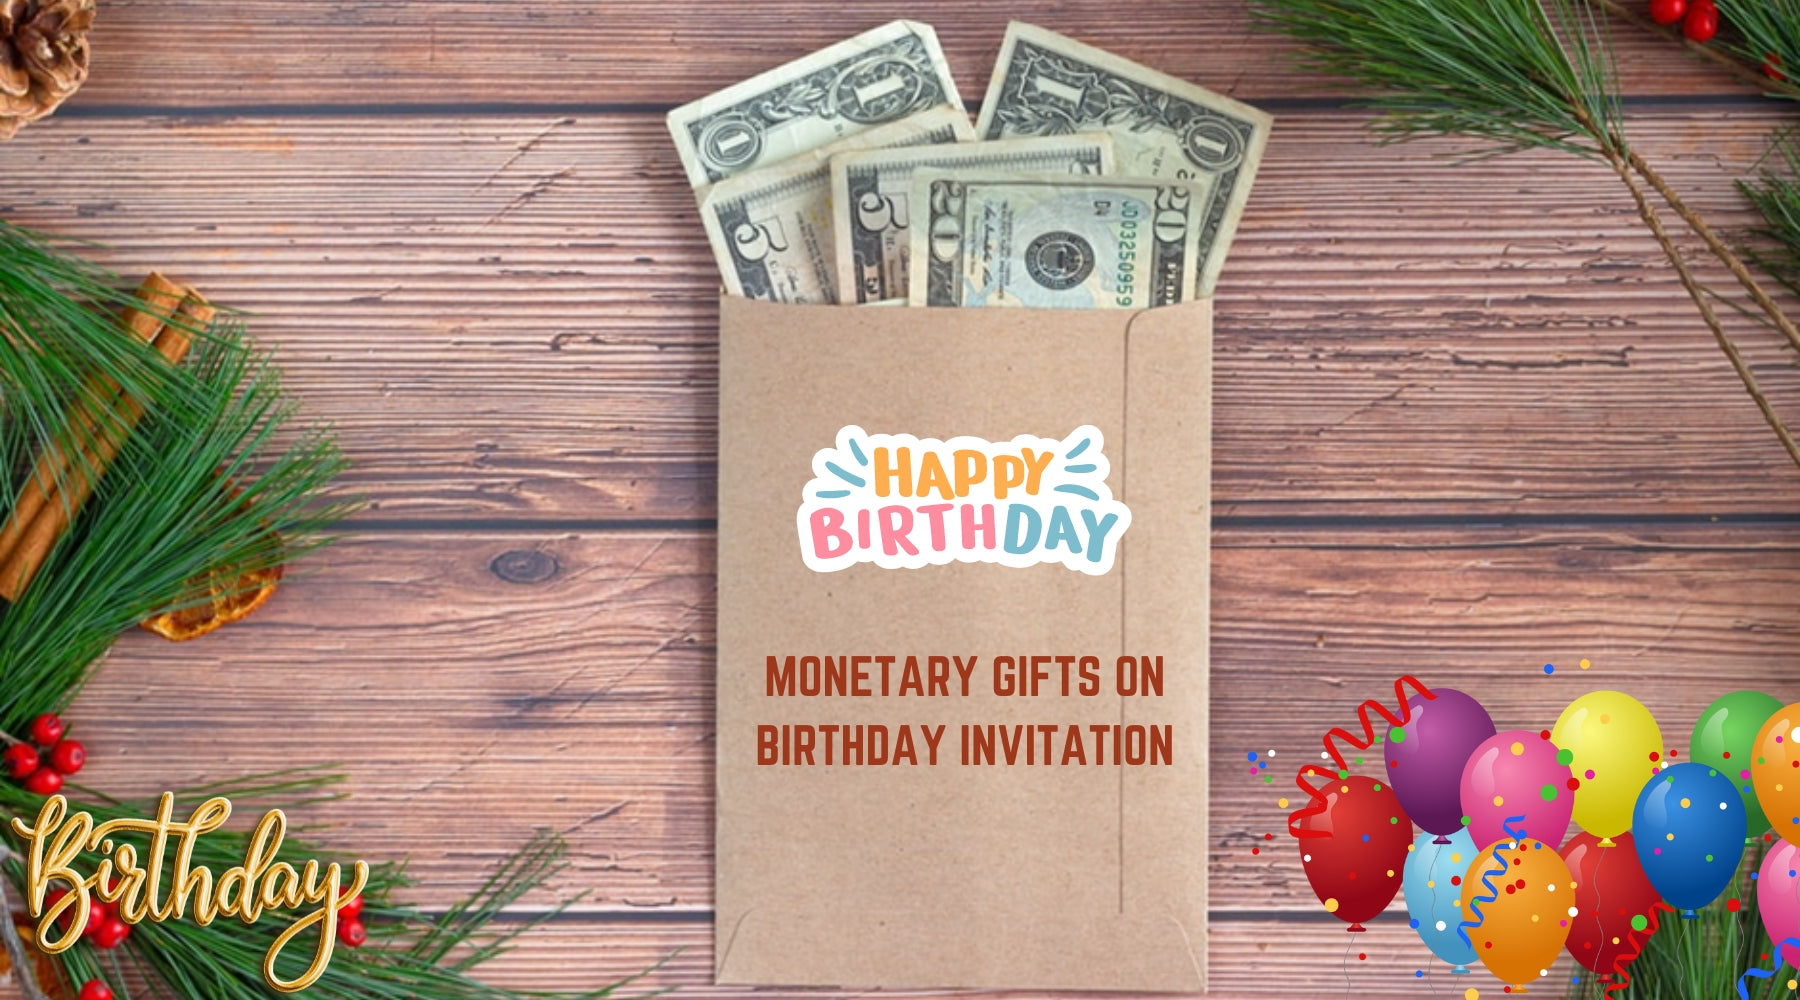 How to Ask for Monetary Gifts on Birthday Invitation? – Mr.Invites